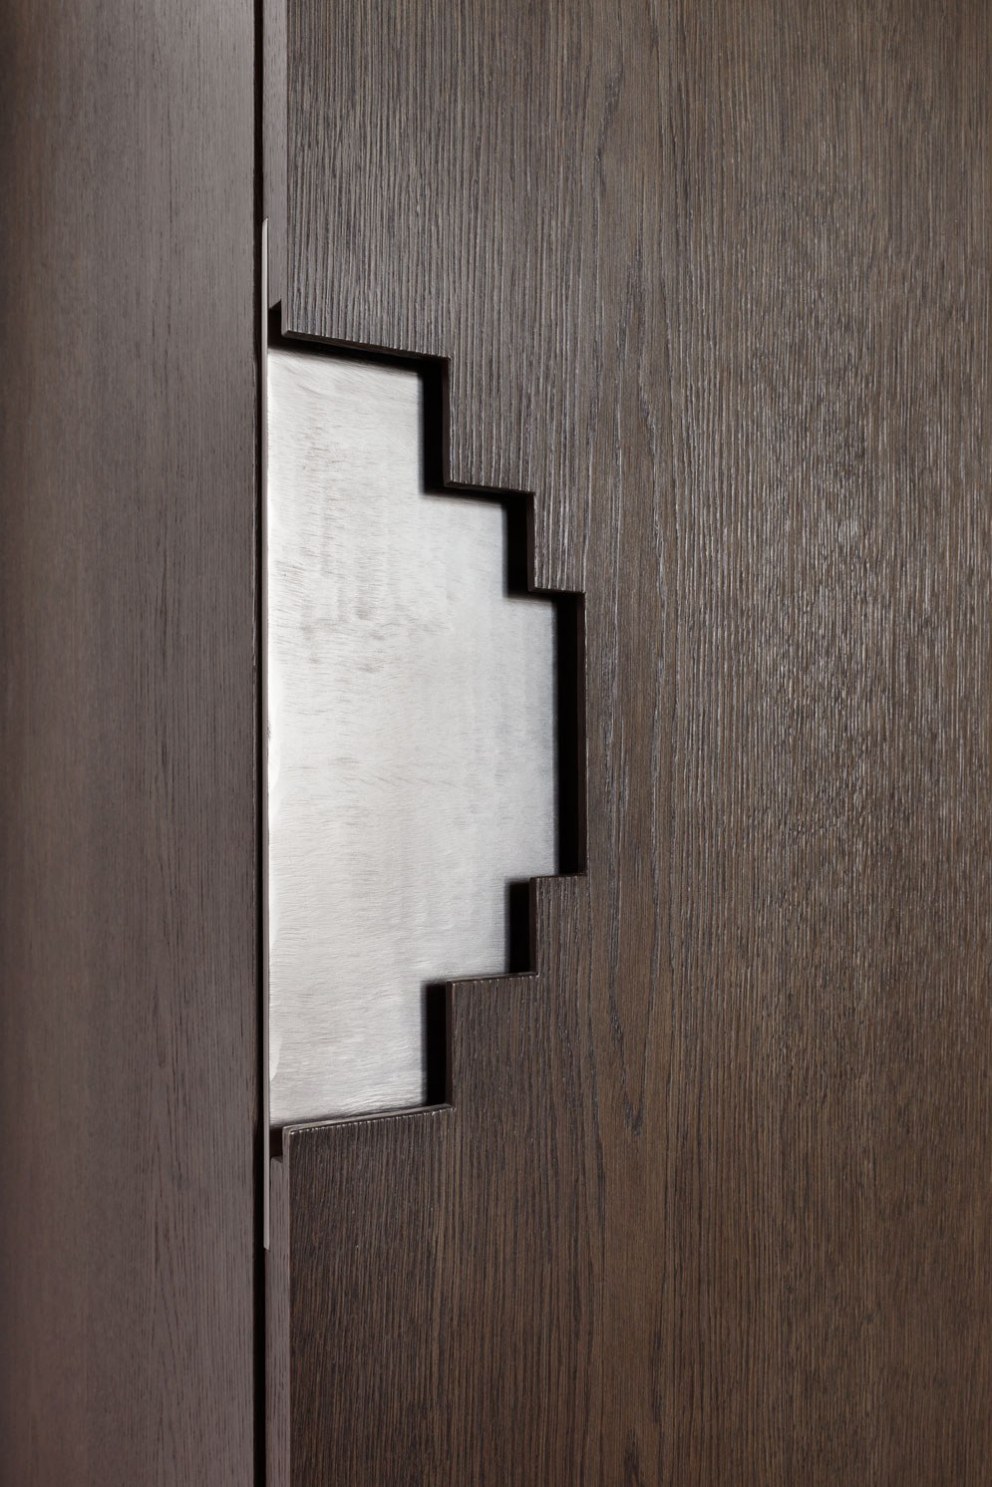 Joinery Series 1 | Joinery Series 1 | Interior Designers